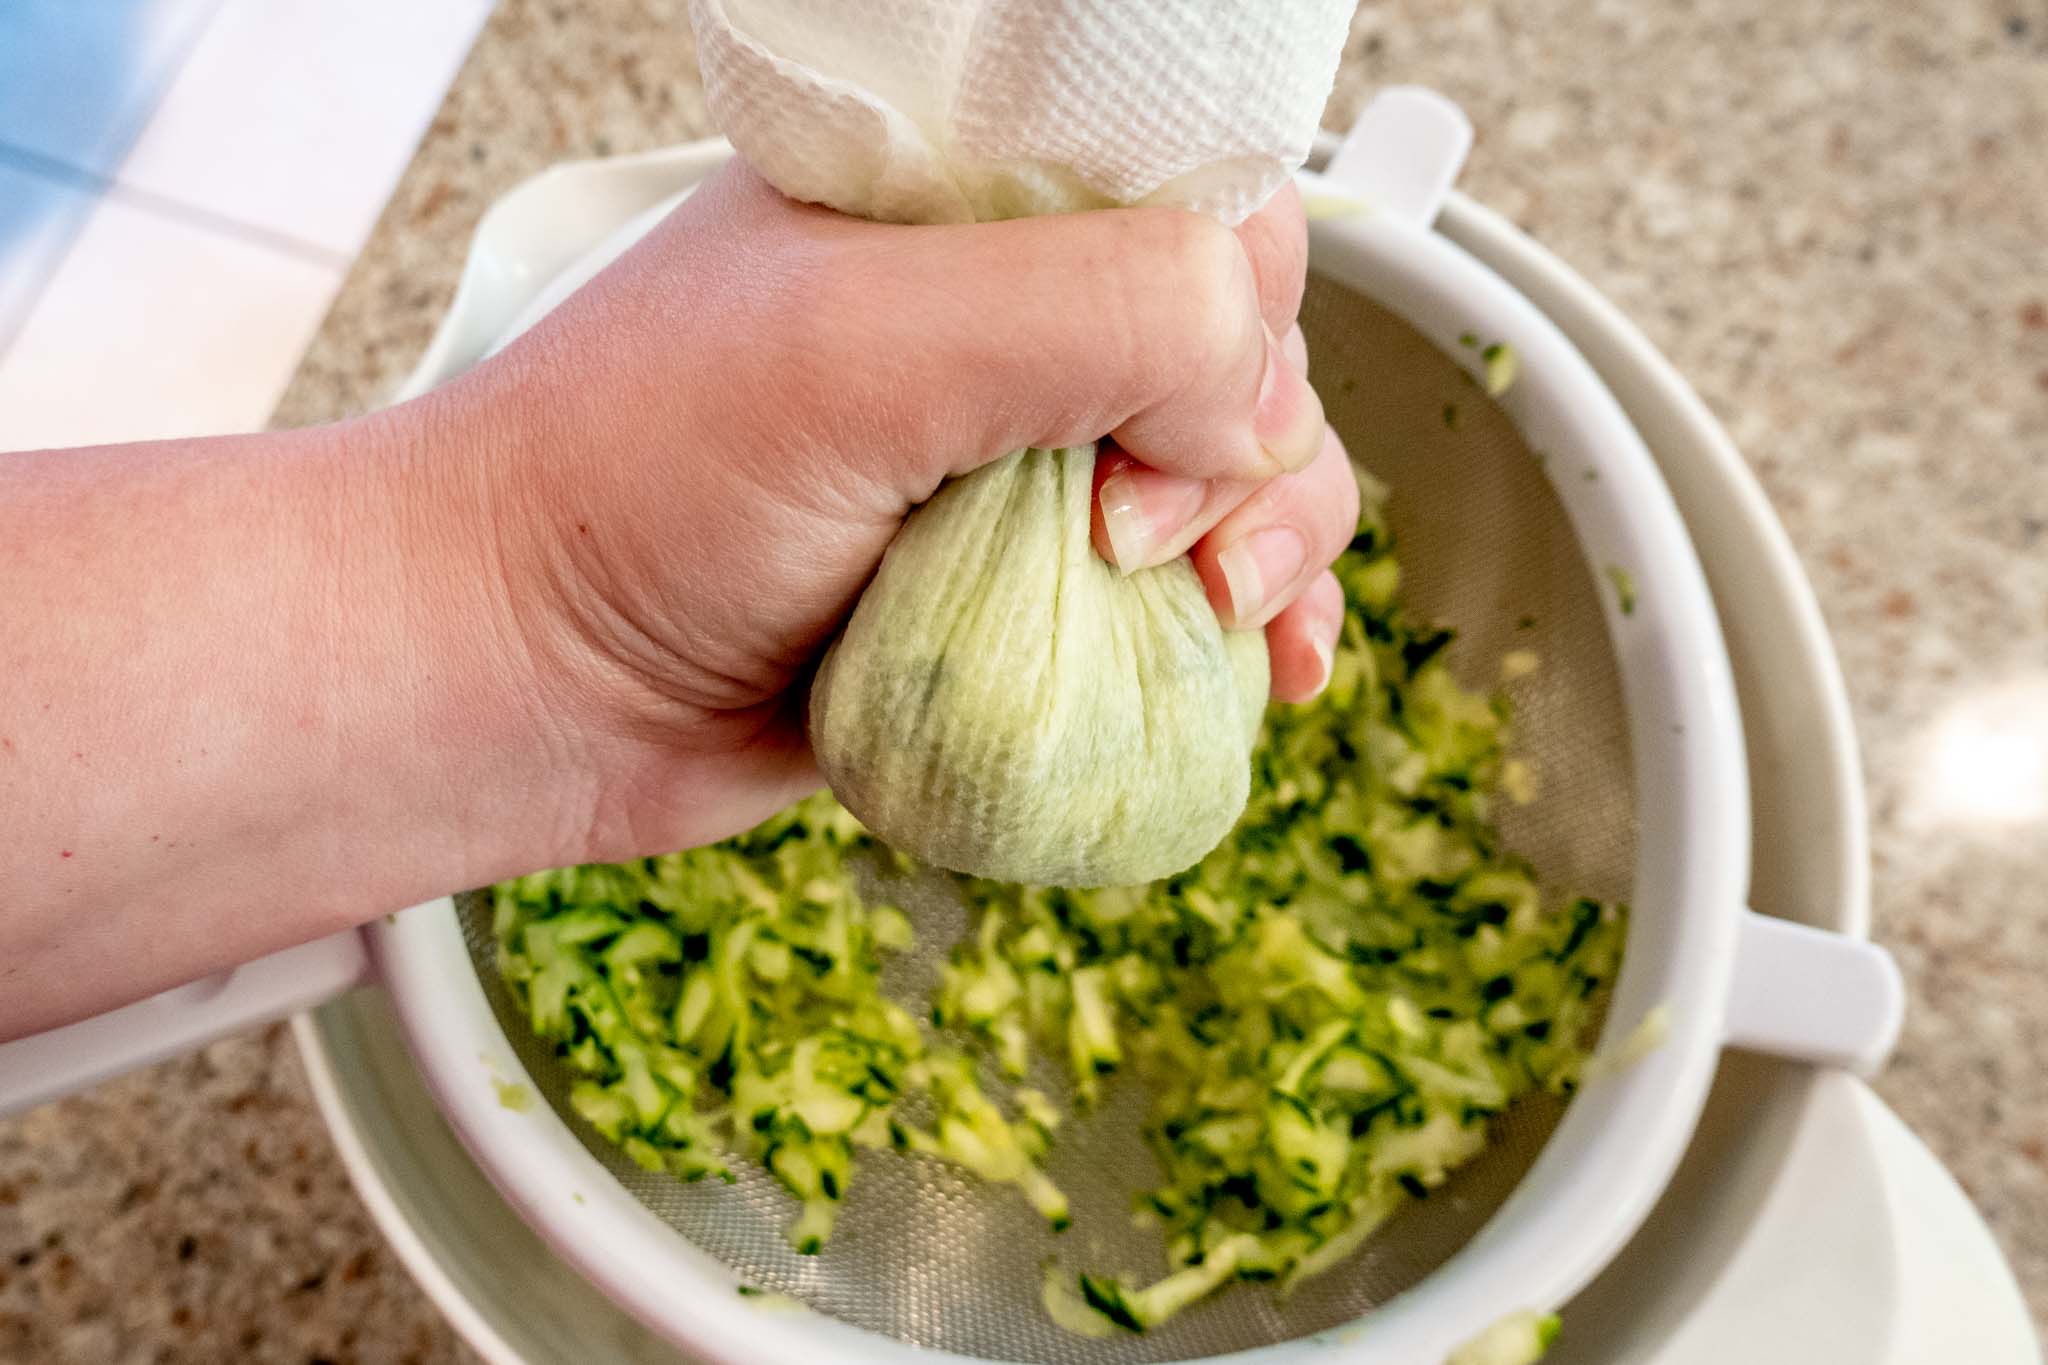 Squeezing liquid from zucchini using a paper towel